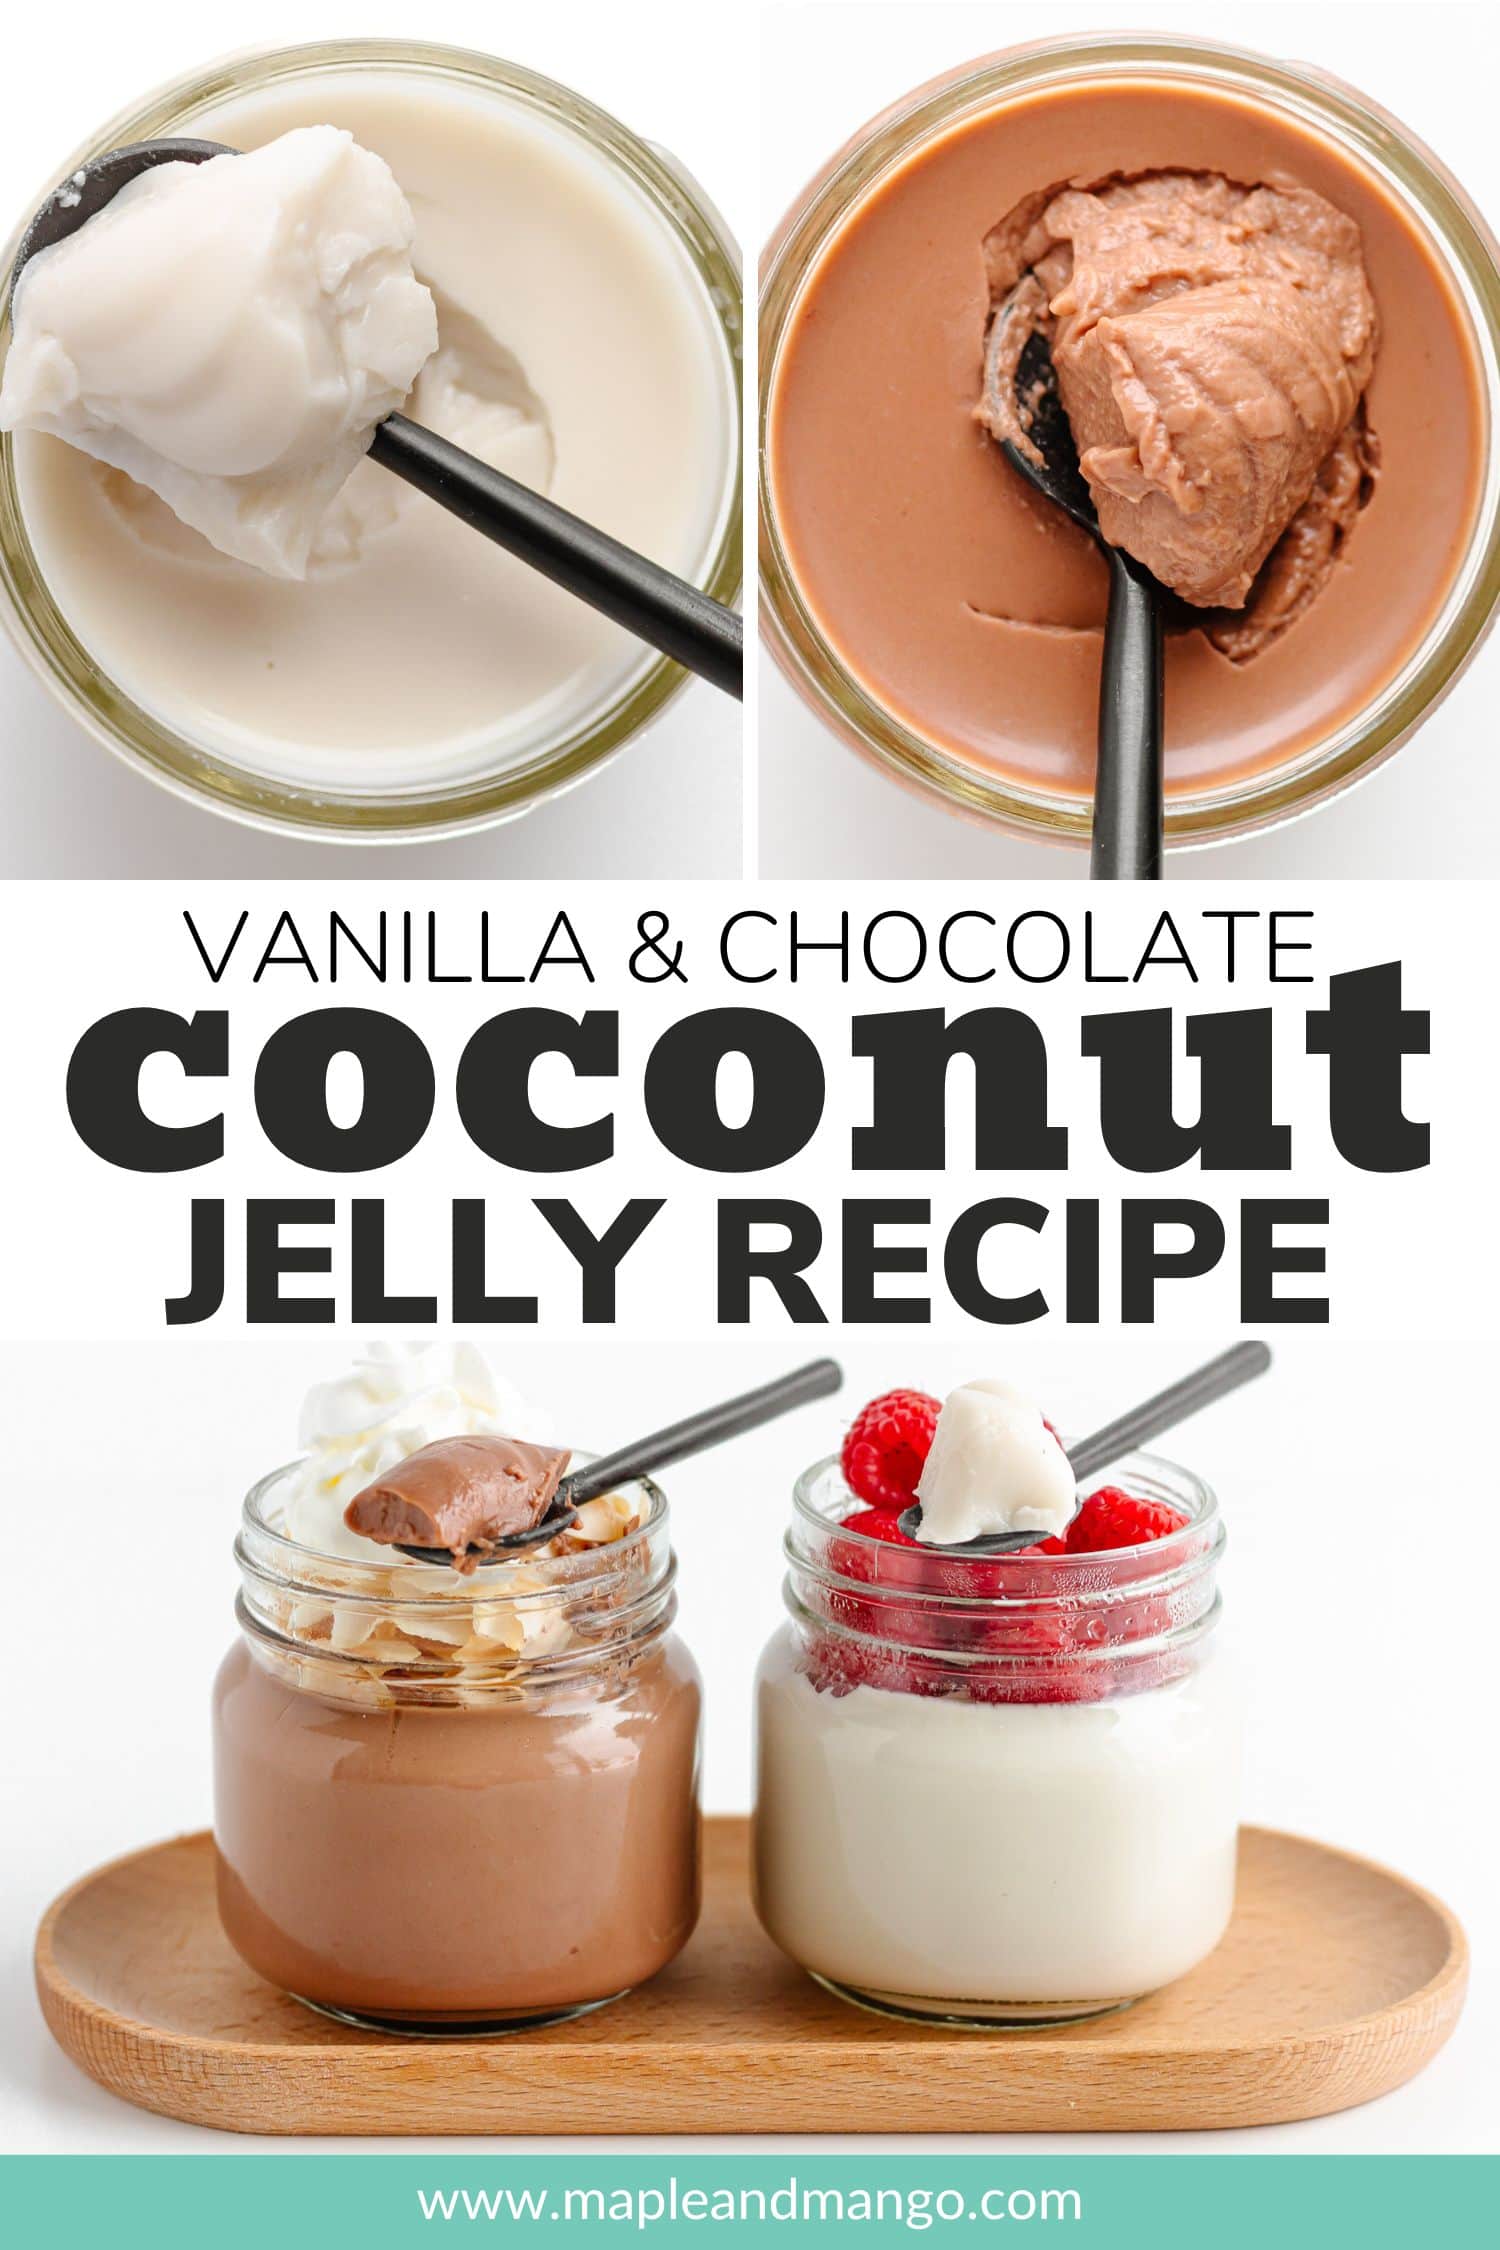 Collage graphic showing photos of coconut milk jelly with text overlay that reads "Vanilla & Chocolate Coconut Jelly Recipe".